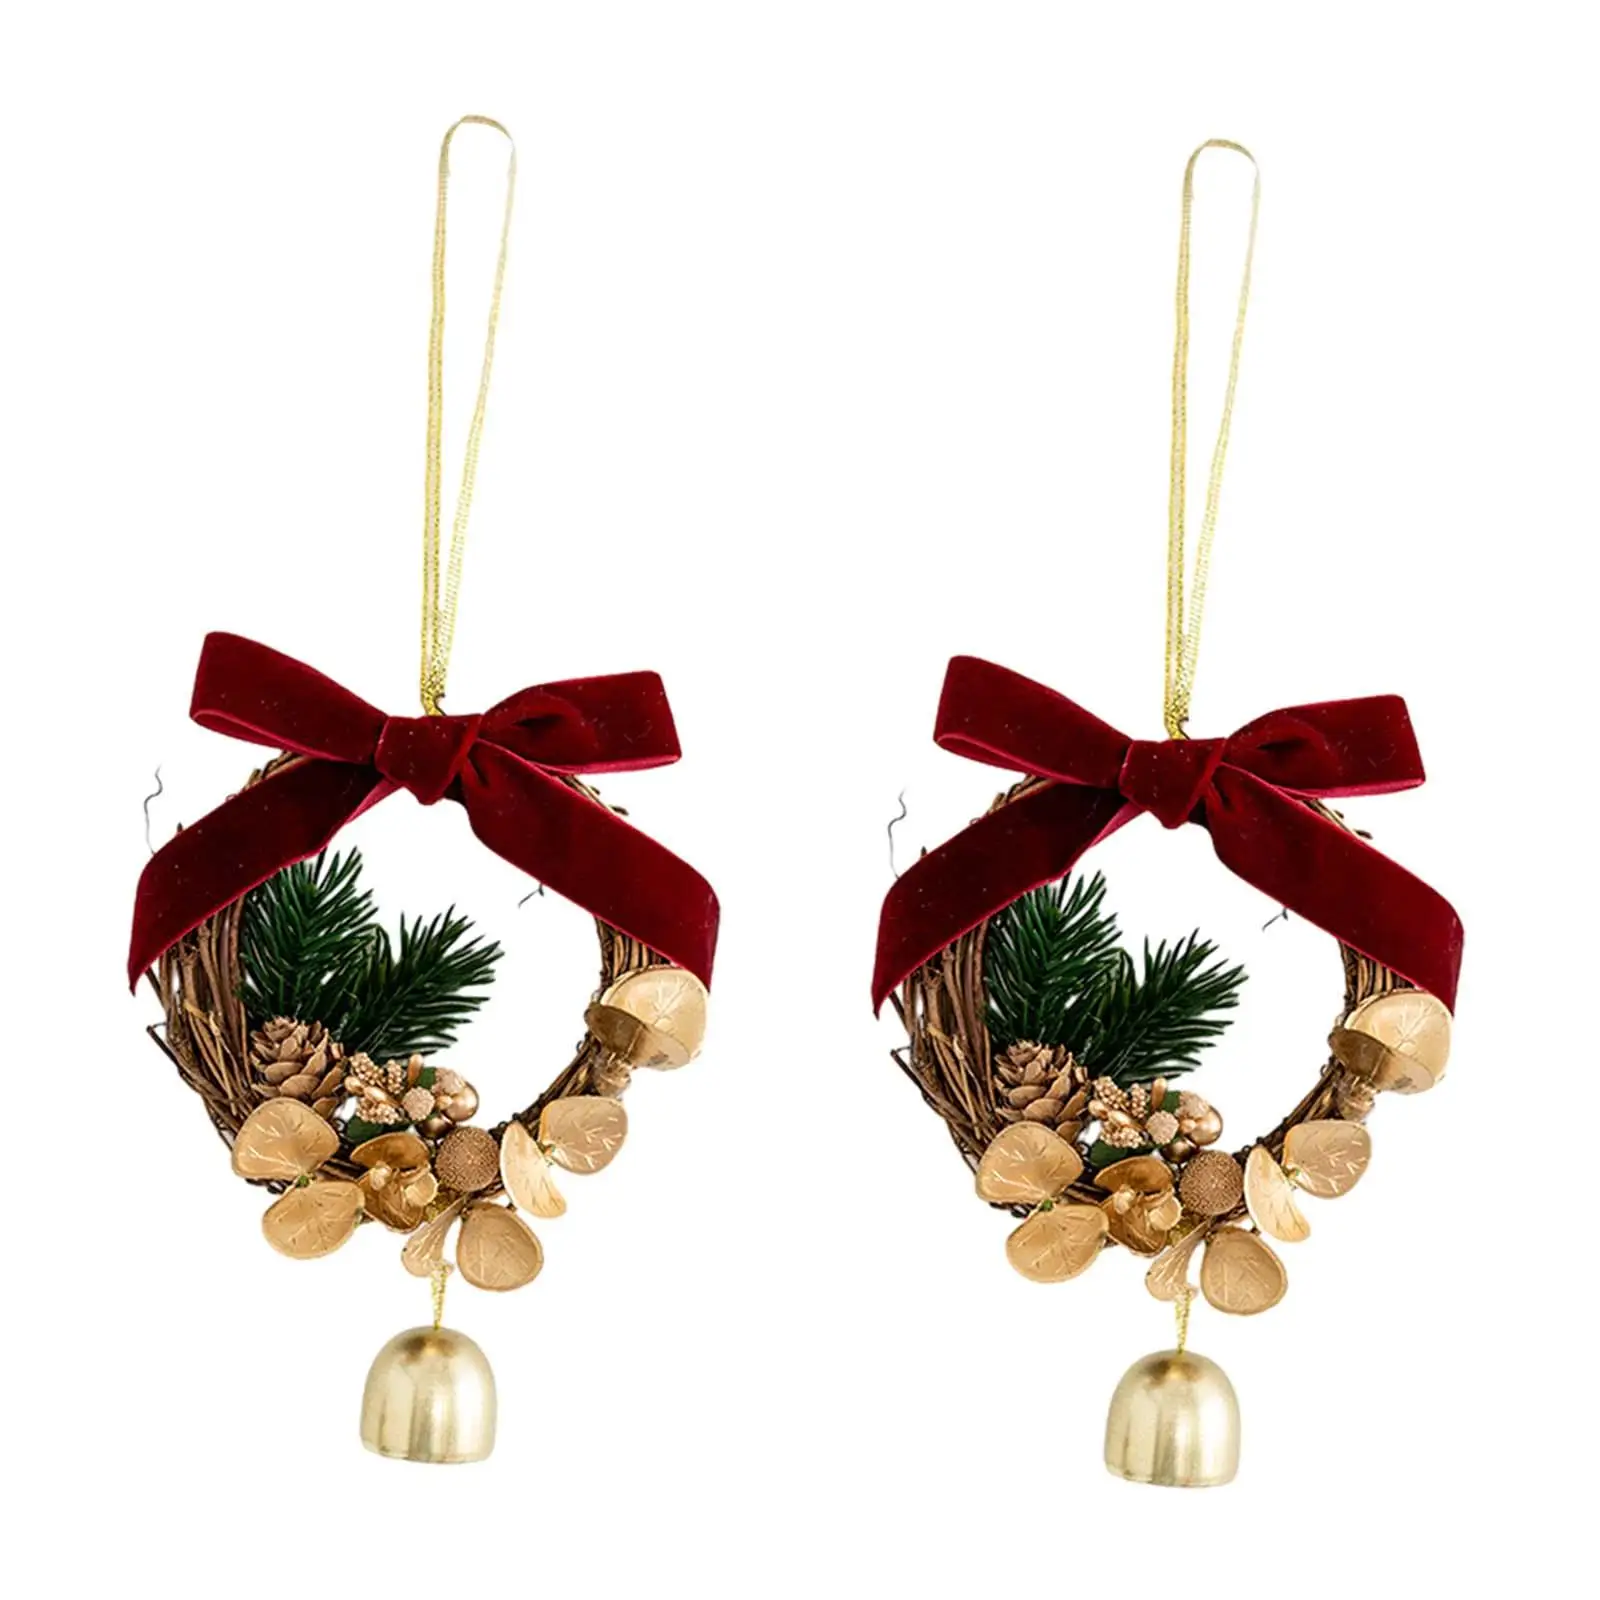 Mini Christmas Wreath Cabinet Wreaths for Chairs Christmas Party Holiday